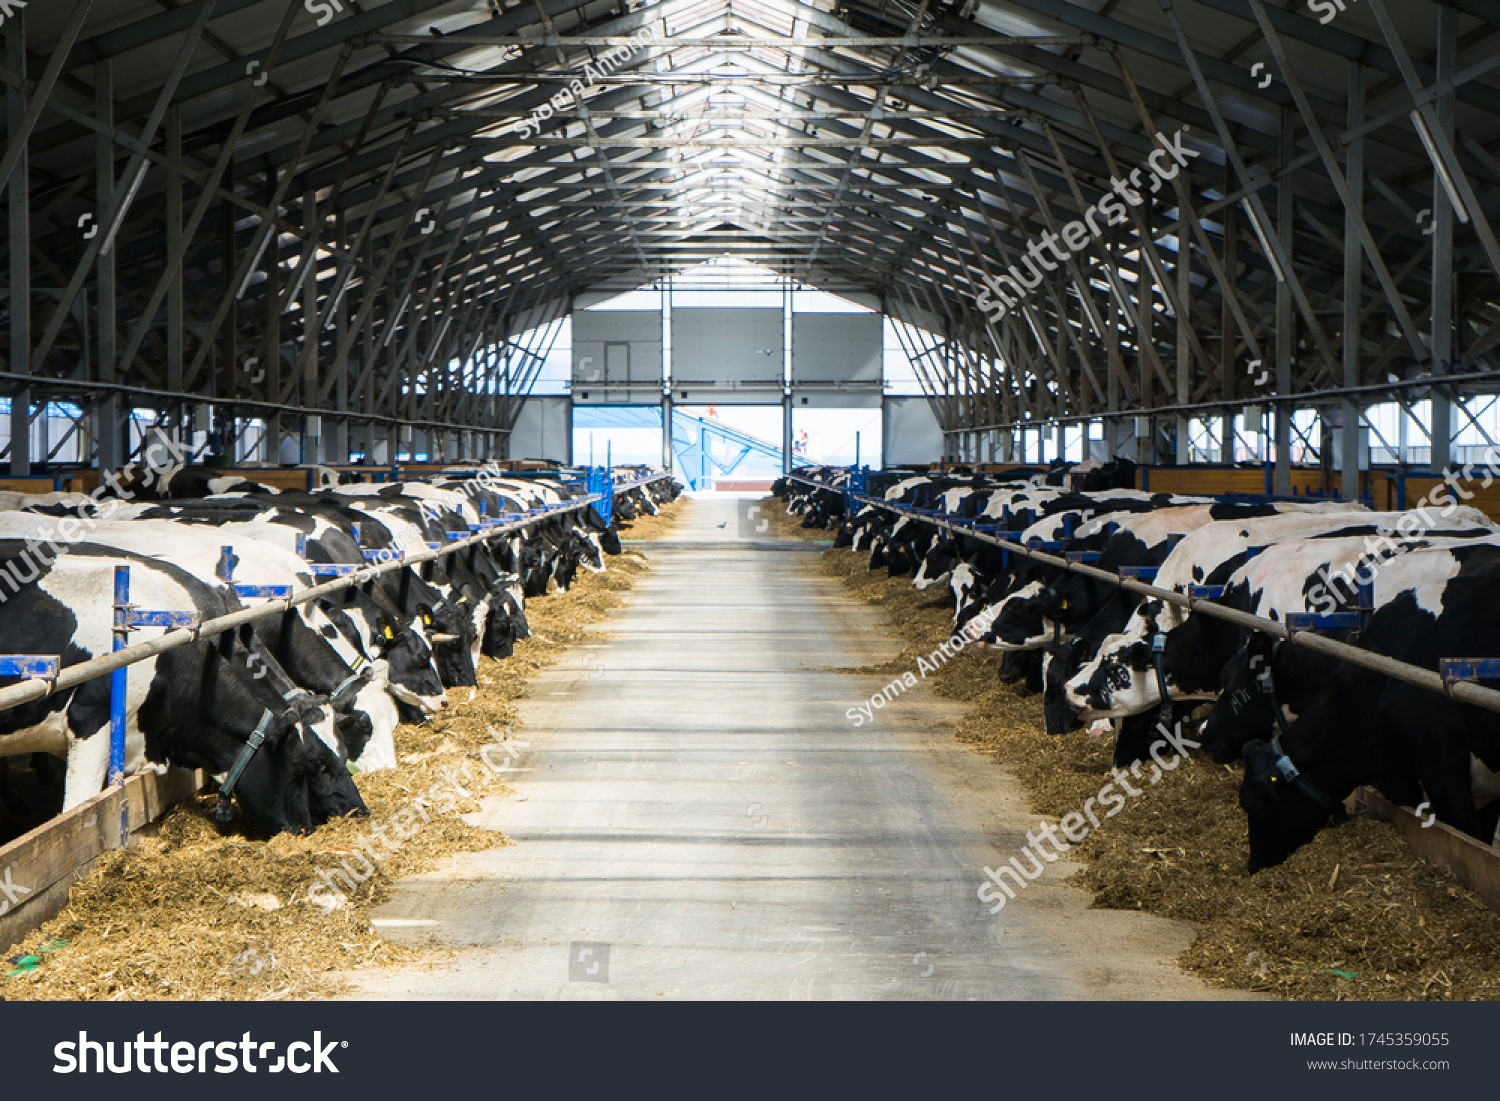 dairy cows on a farm in the stall. Cows eat hay or grass. Cattle breeding for dairy and meat production. Agricultural farm. Livestock #1745359055